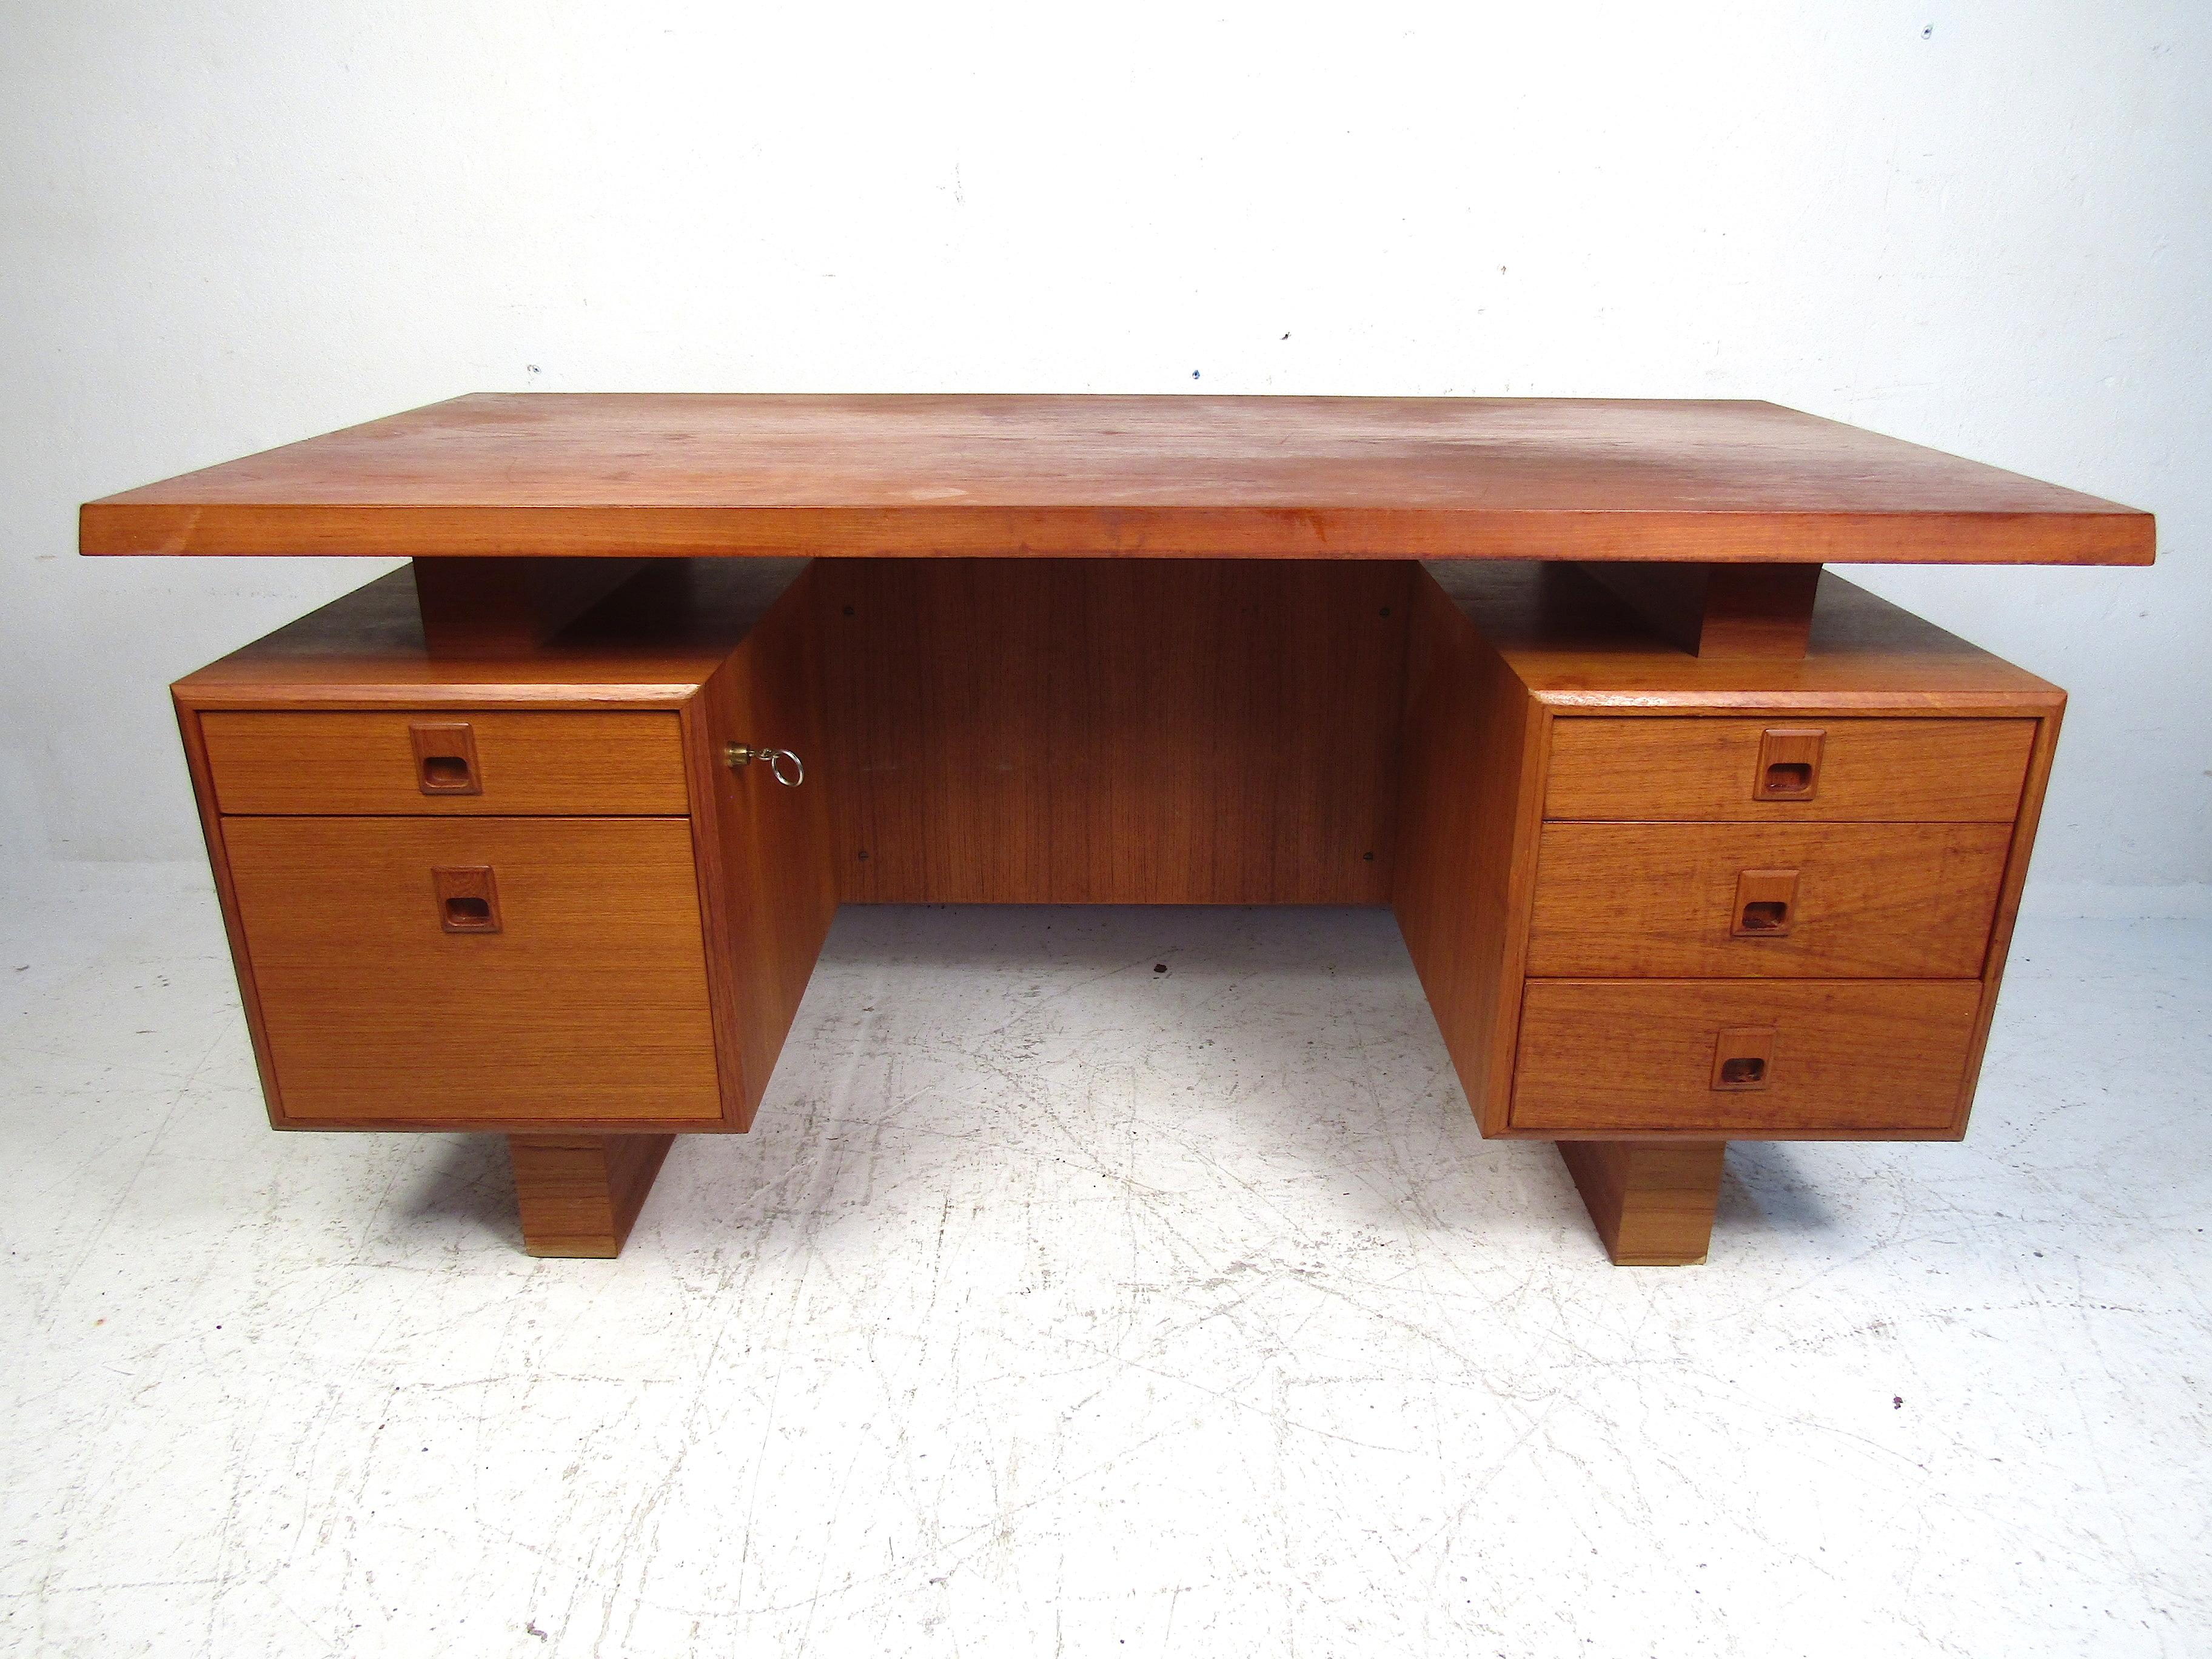 Stylish Mid-Century Modern teak writing desk. Interesting design with a floating desktop, and drawer cases on either end with recessed drawer pulls. Please confirm item location with dealer (NJ or NY).